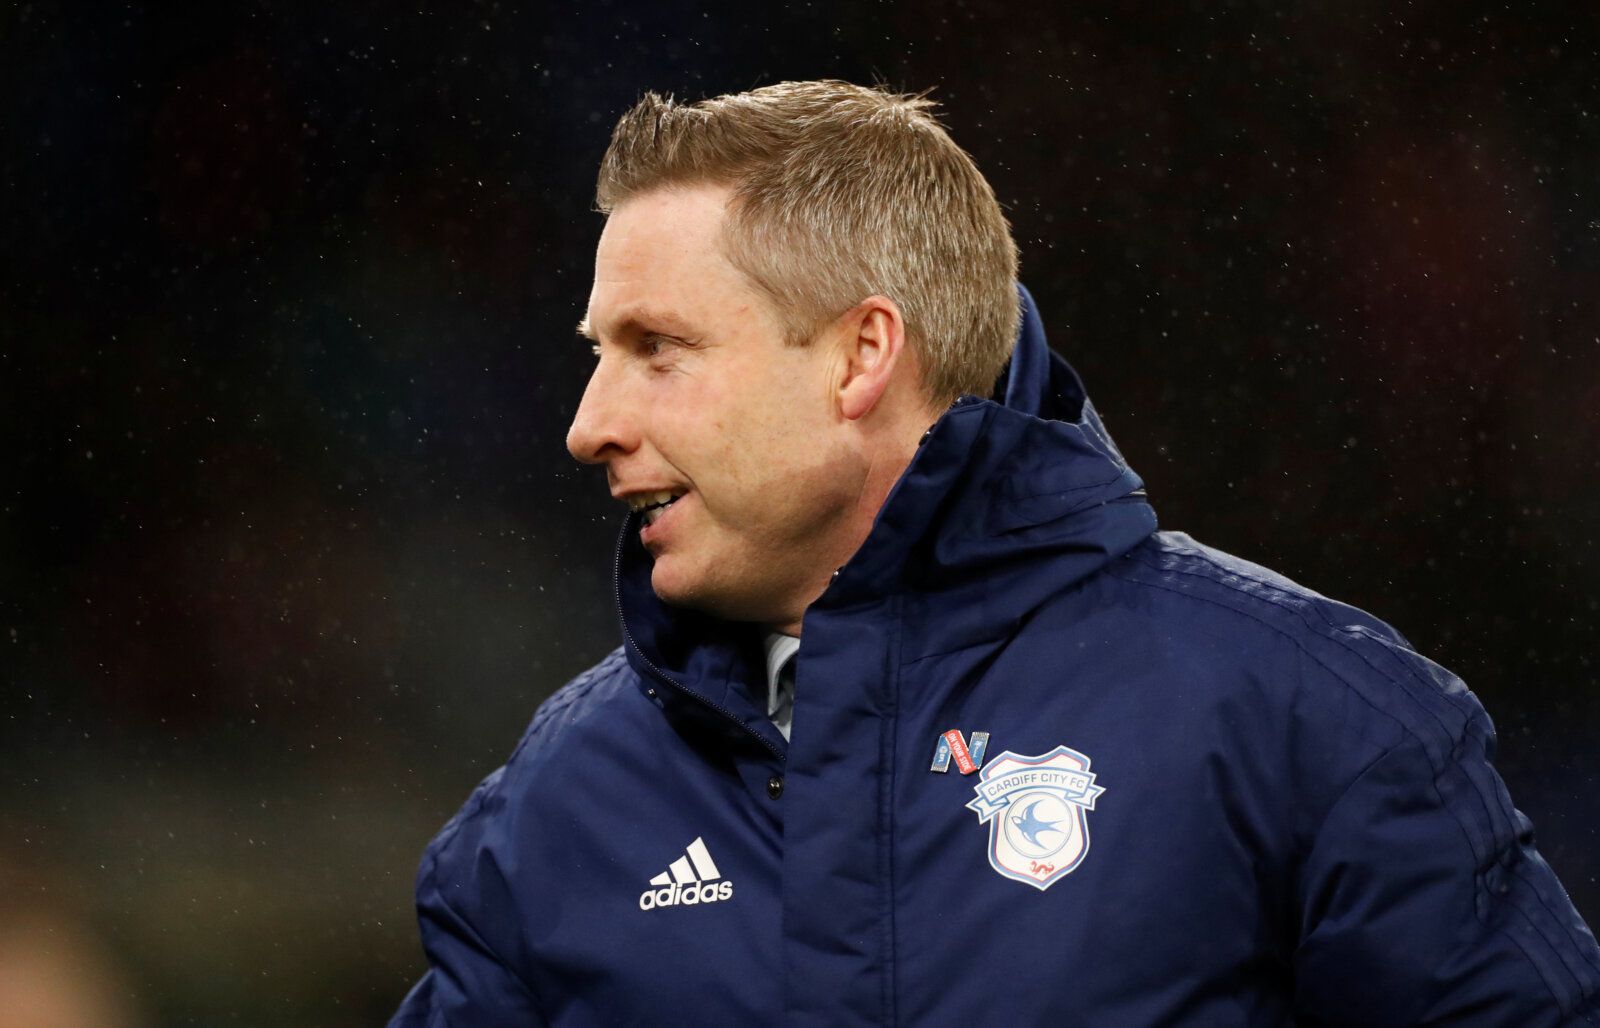 Soccer Football - Championship - Cardiff City v Reading - Cardiff City Stadium, Cardiff, Britain - January 31, 2020   Cardiff manager Neil Harris   Action Images/Andrew Boyers    EDITORIAL USE ONLY. No use with unauthorized audio, video, data, fixture lists, club/league logos or 